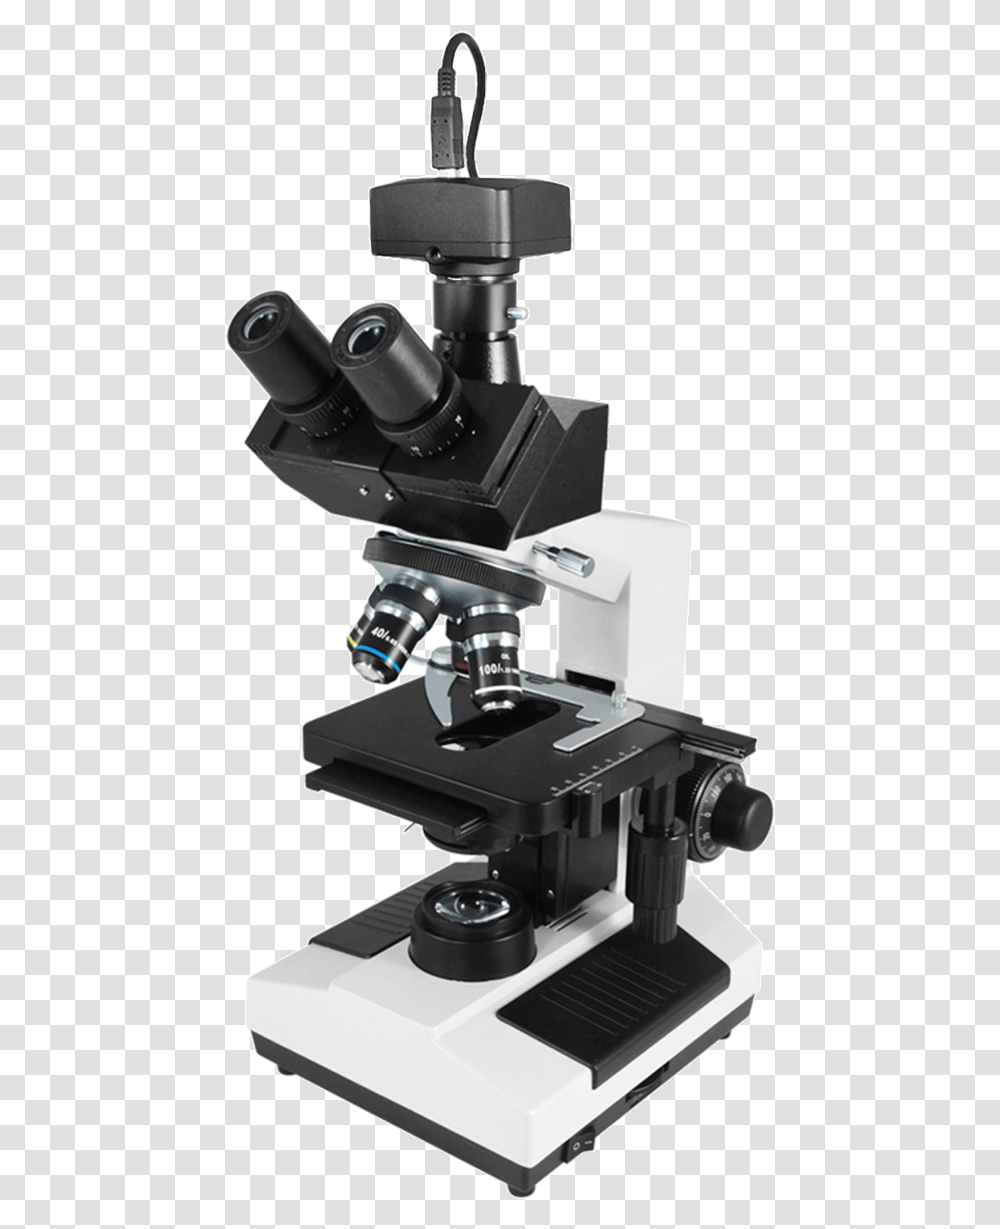 Milling, Microscope, Sink Faucet Transparent Png